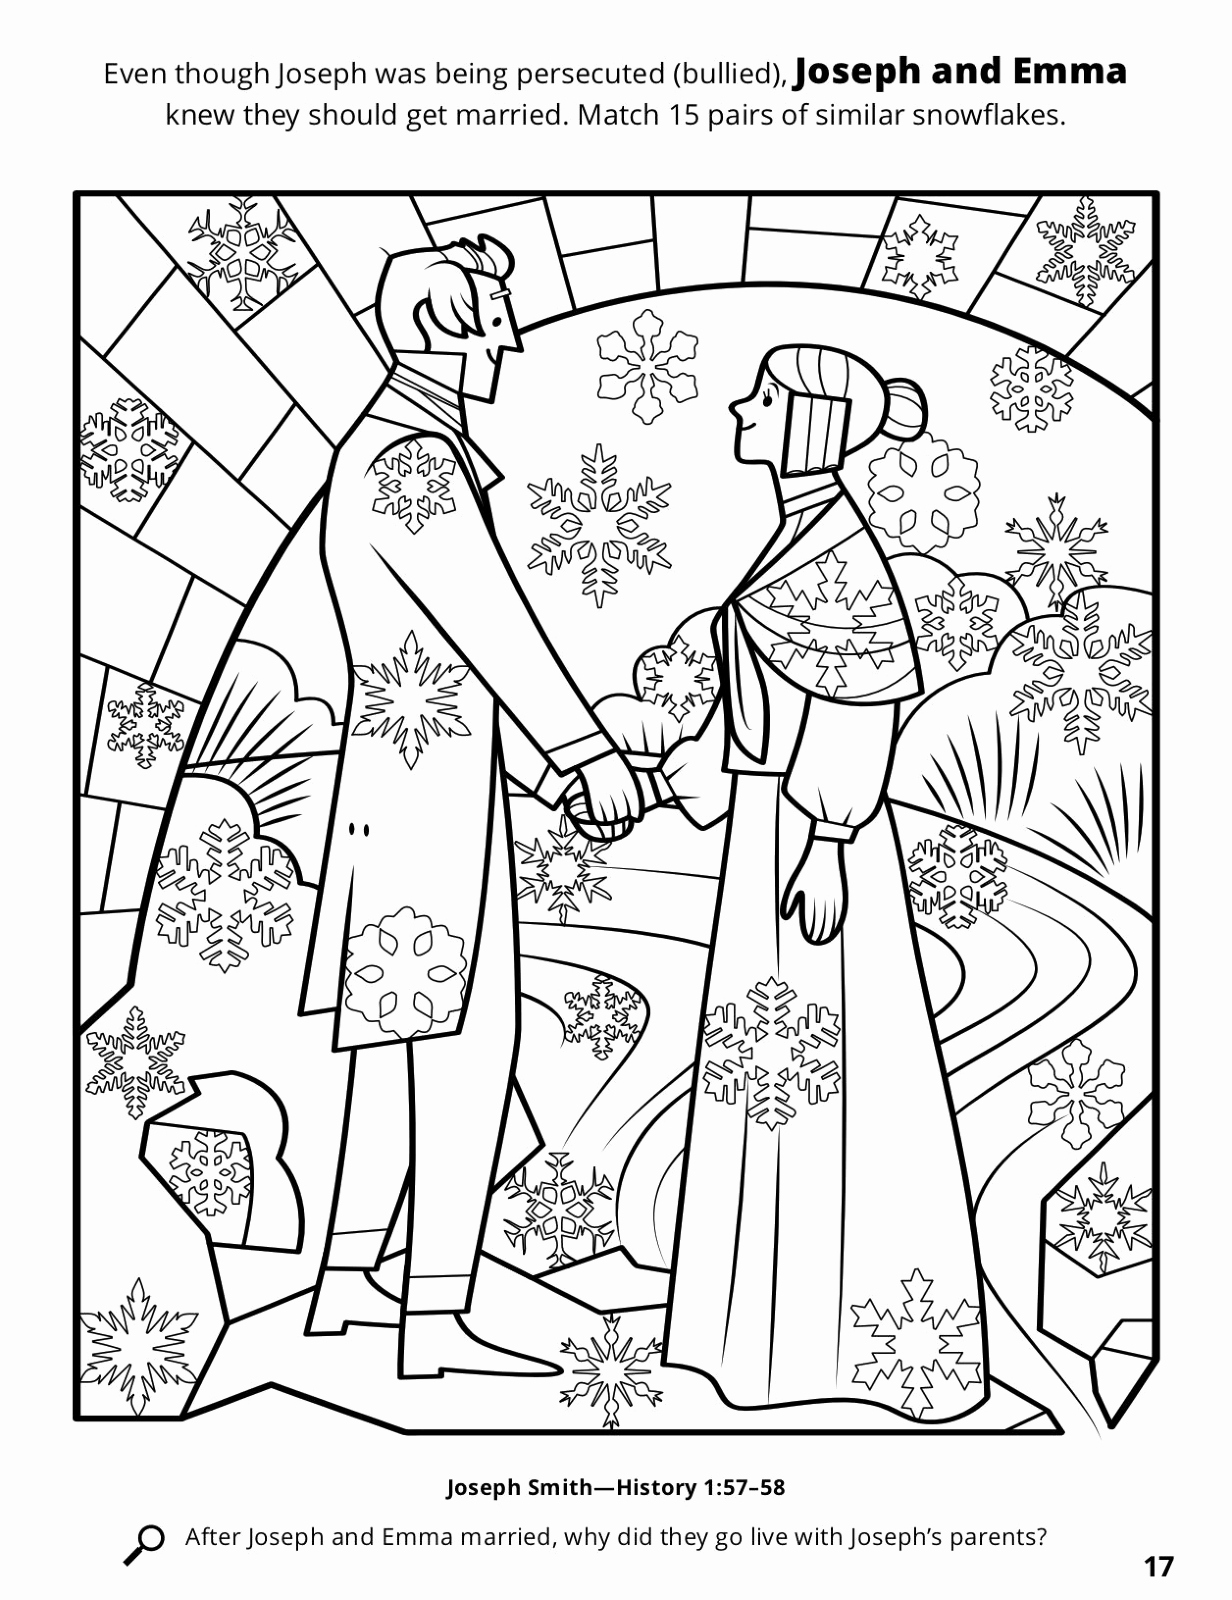 Joseph Bible Story Coloring Pages At Getcolorings.com | Free Printable